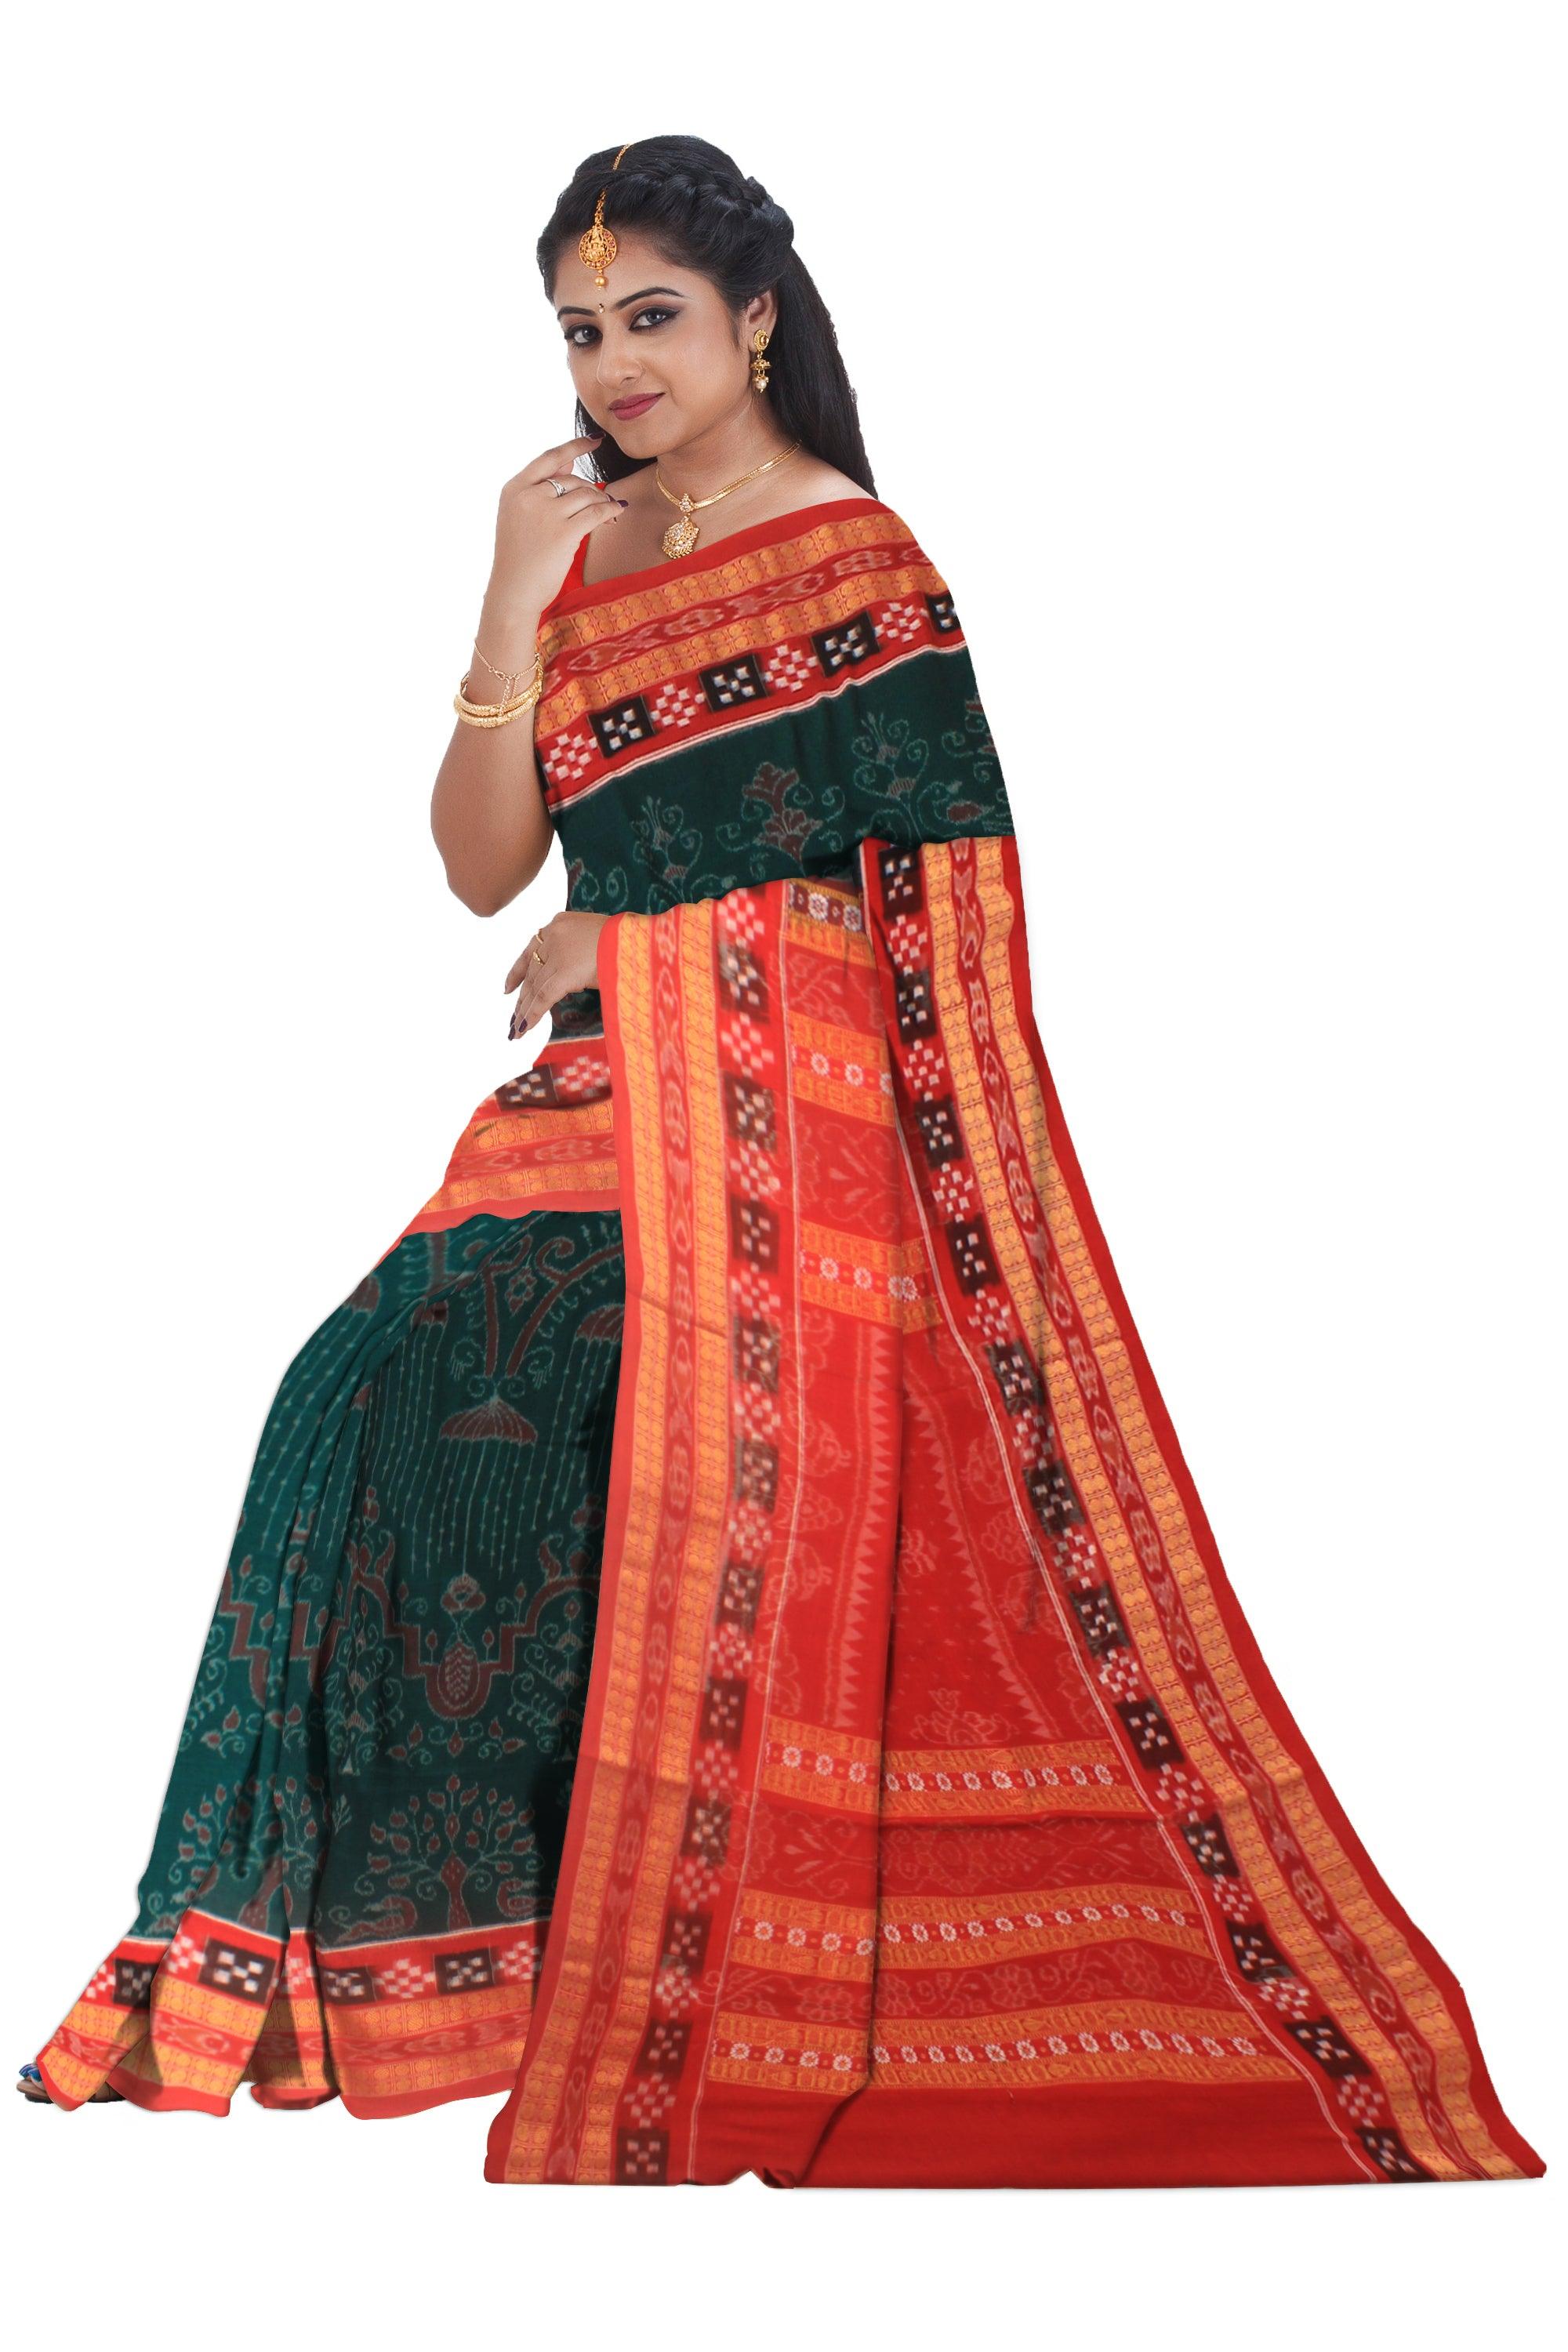 Tree, Flower and Mayuri design Smbalpuri cotton saree in dark Green and Red colour with blouse piece. - Koshali Arts & Crafts Enterprise